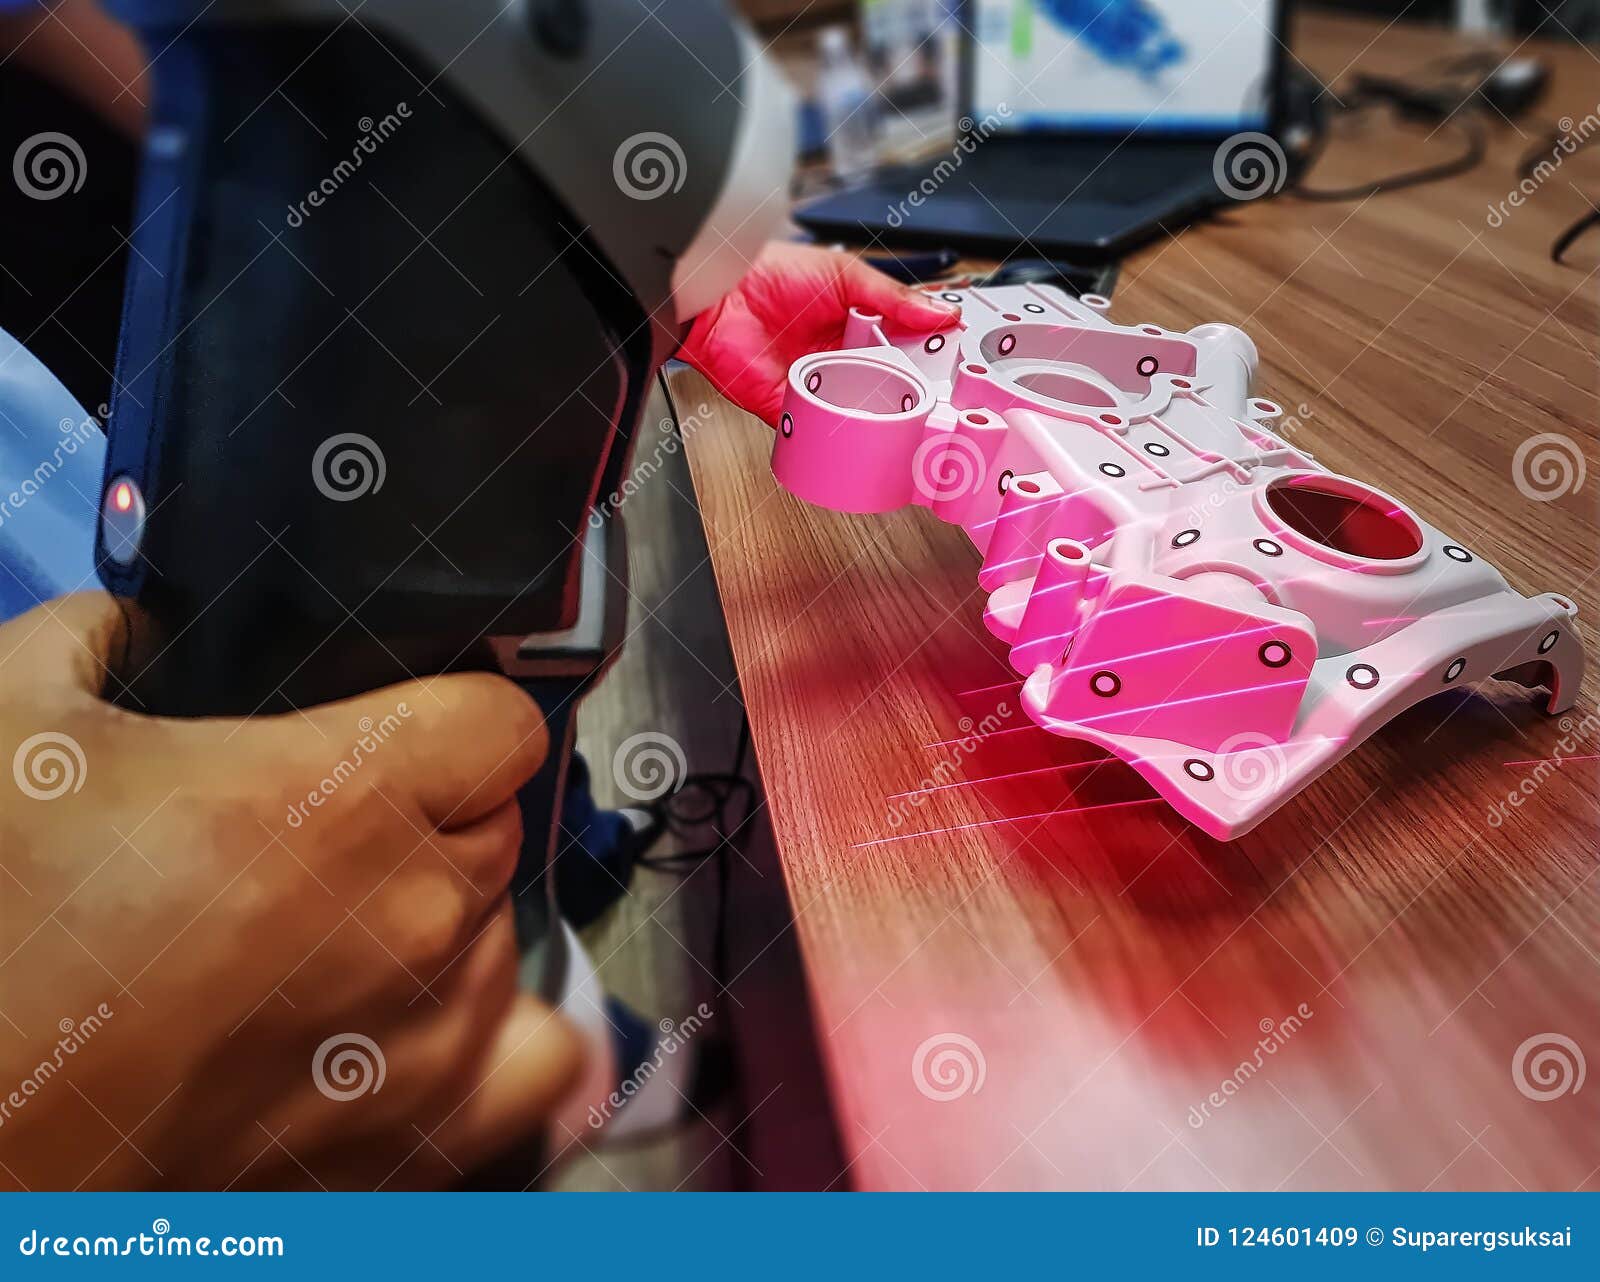 man using portable scanner to scan 3d cad model of complex mechanical part